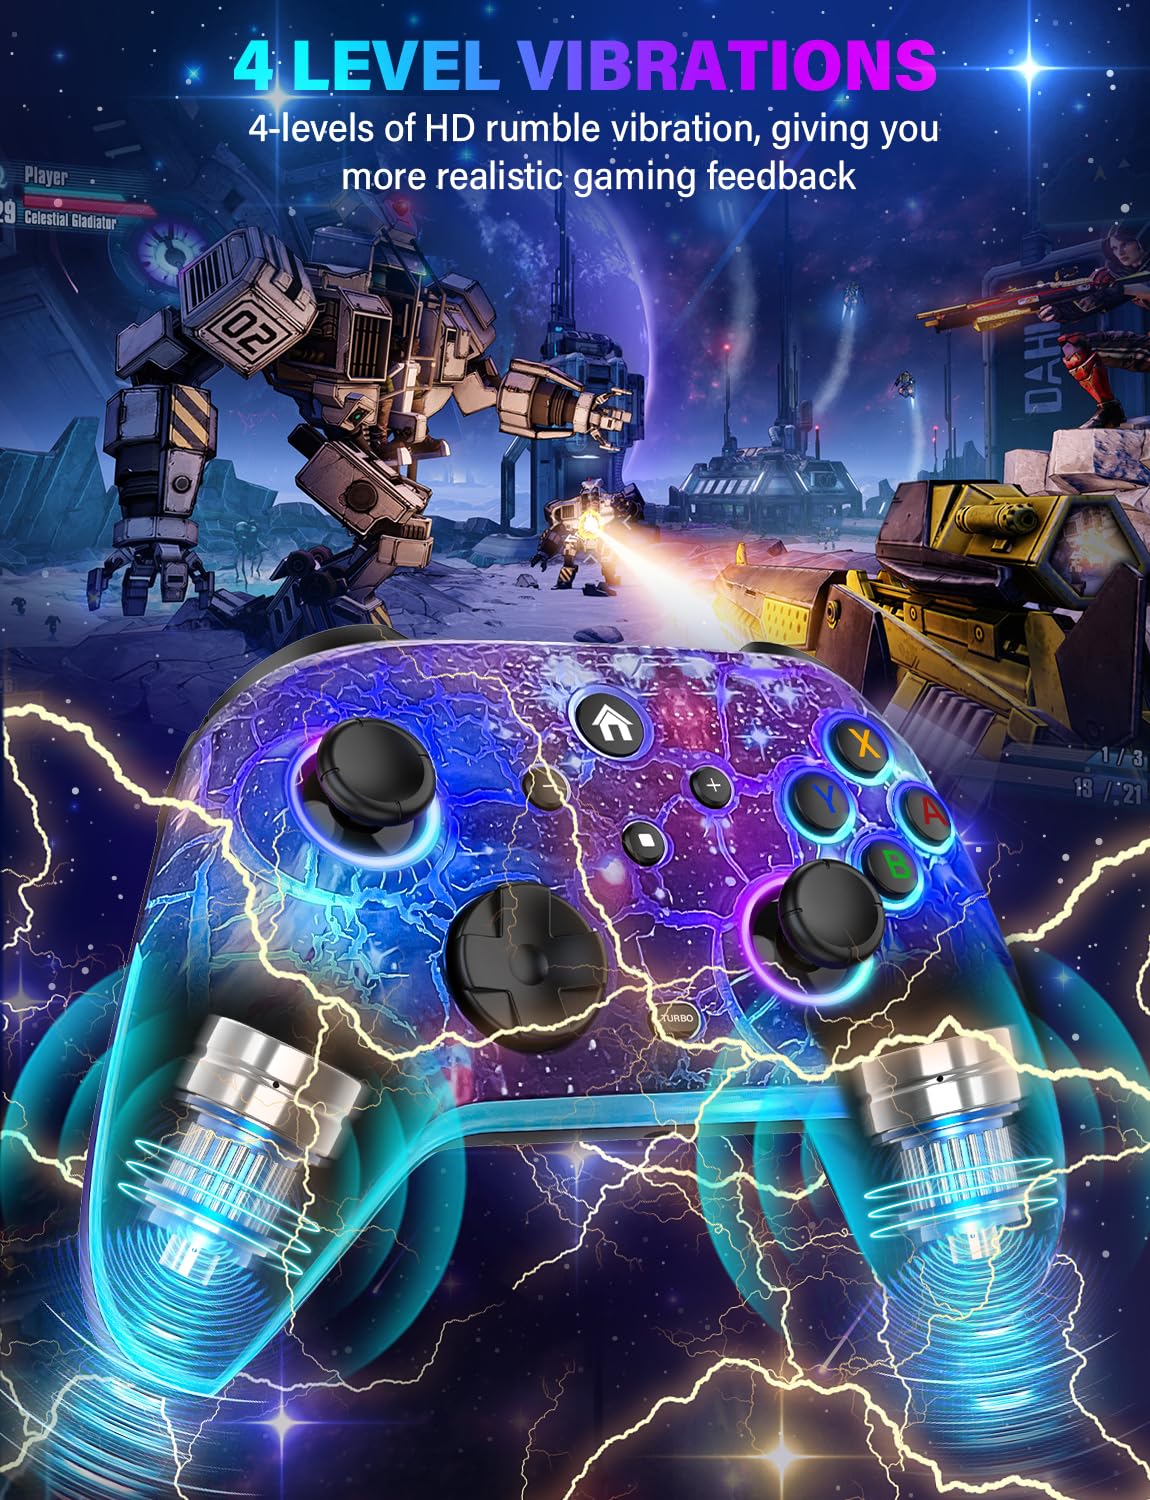 Wireless Switch Pro Controller - Compatible with Nitendo Switch/OLED/Lite, 1200mAh Rechargeable Switch Controllers with 8 Colors LED & Cool Nebula Design, Wake Up, Turbo, Vibration, Motion Control